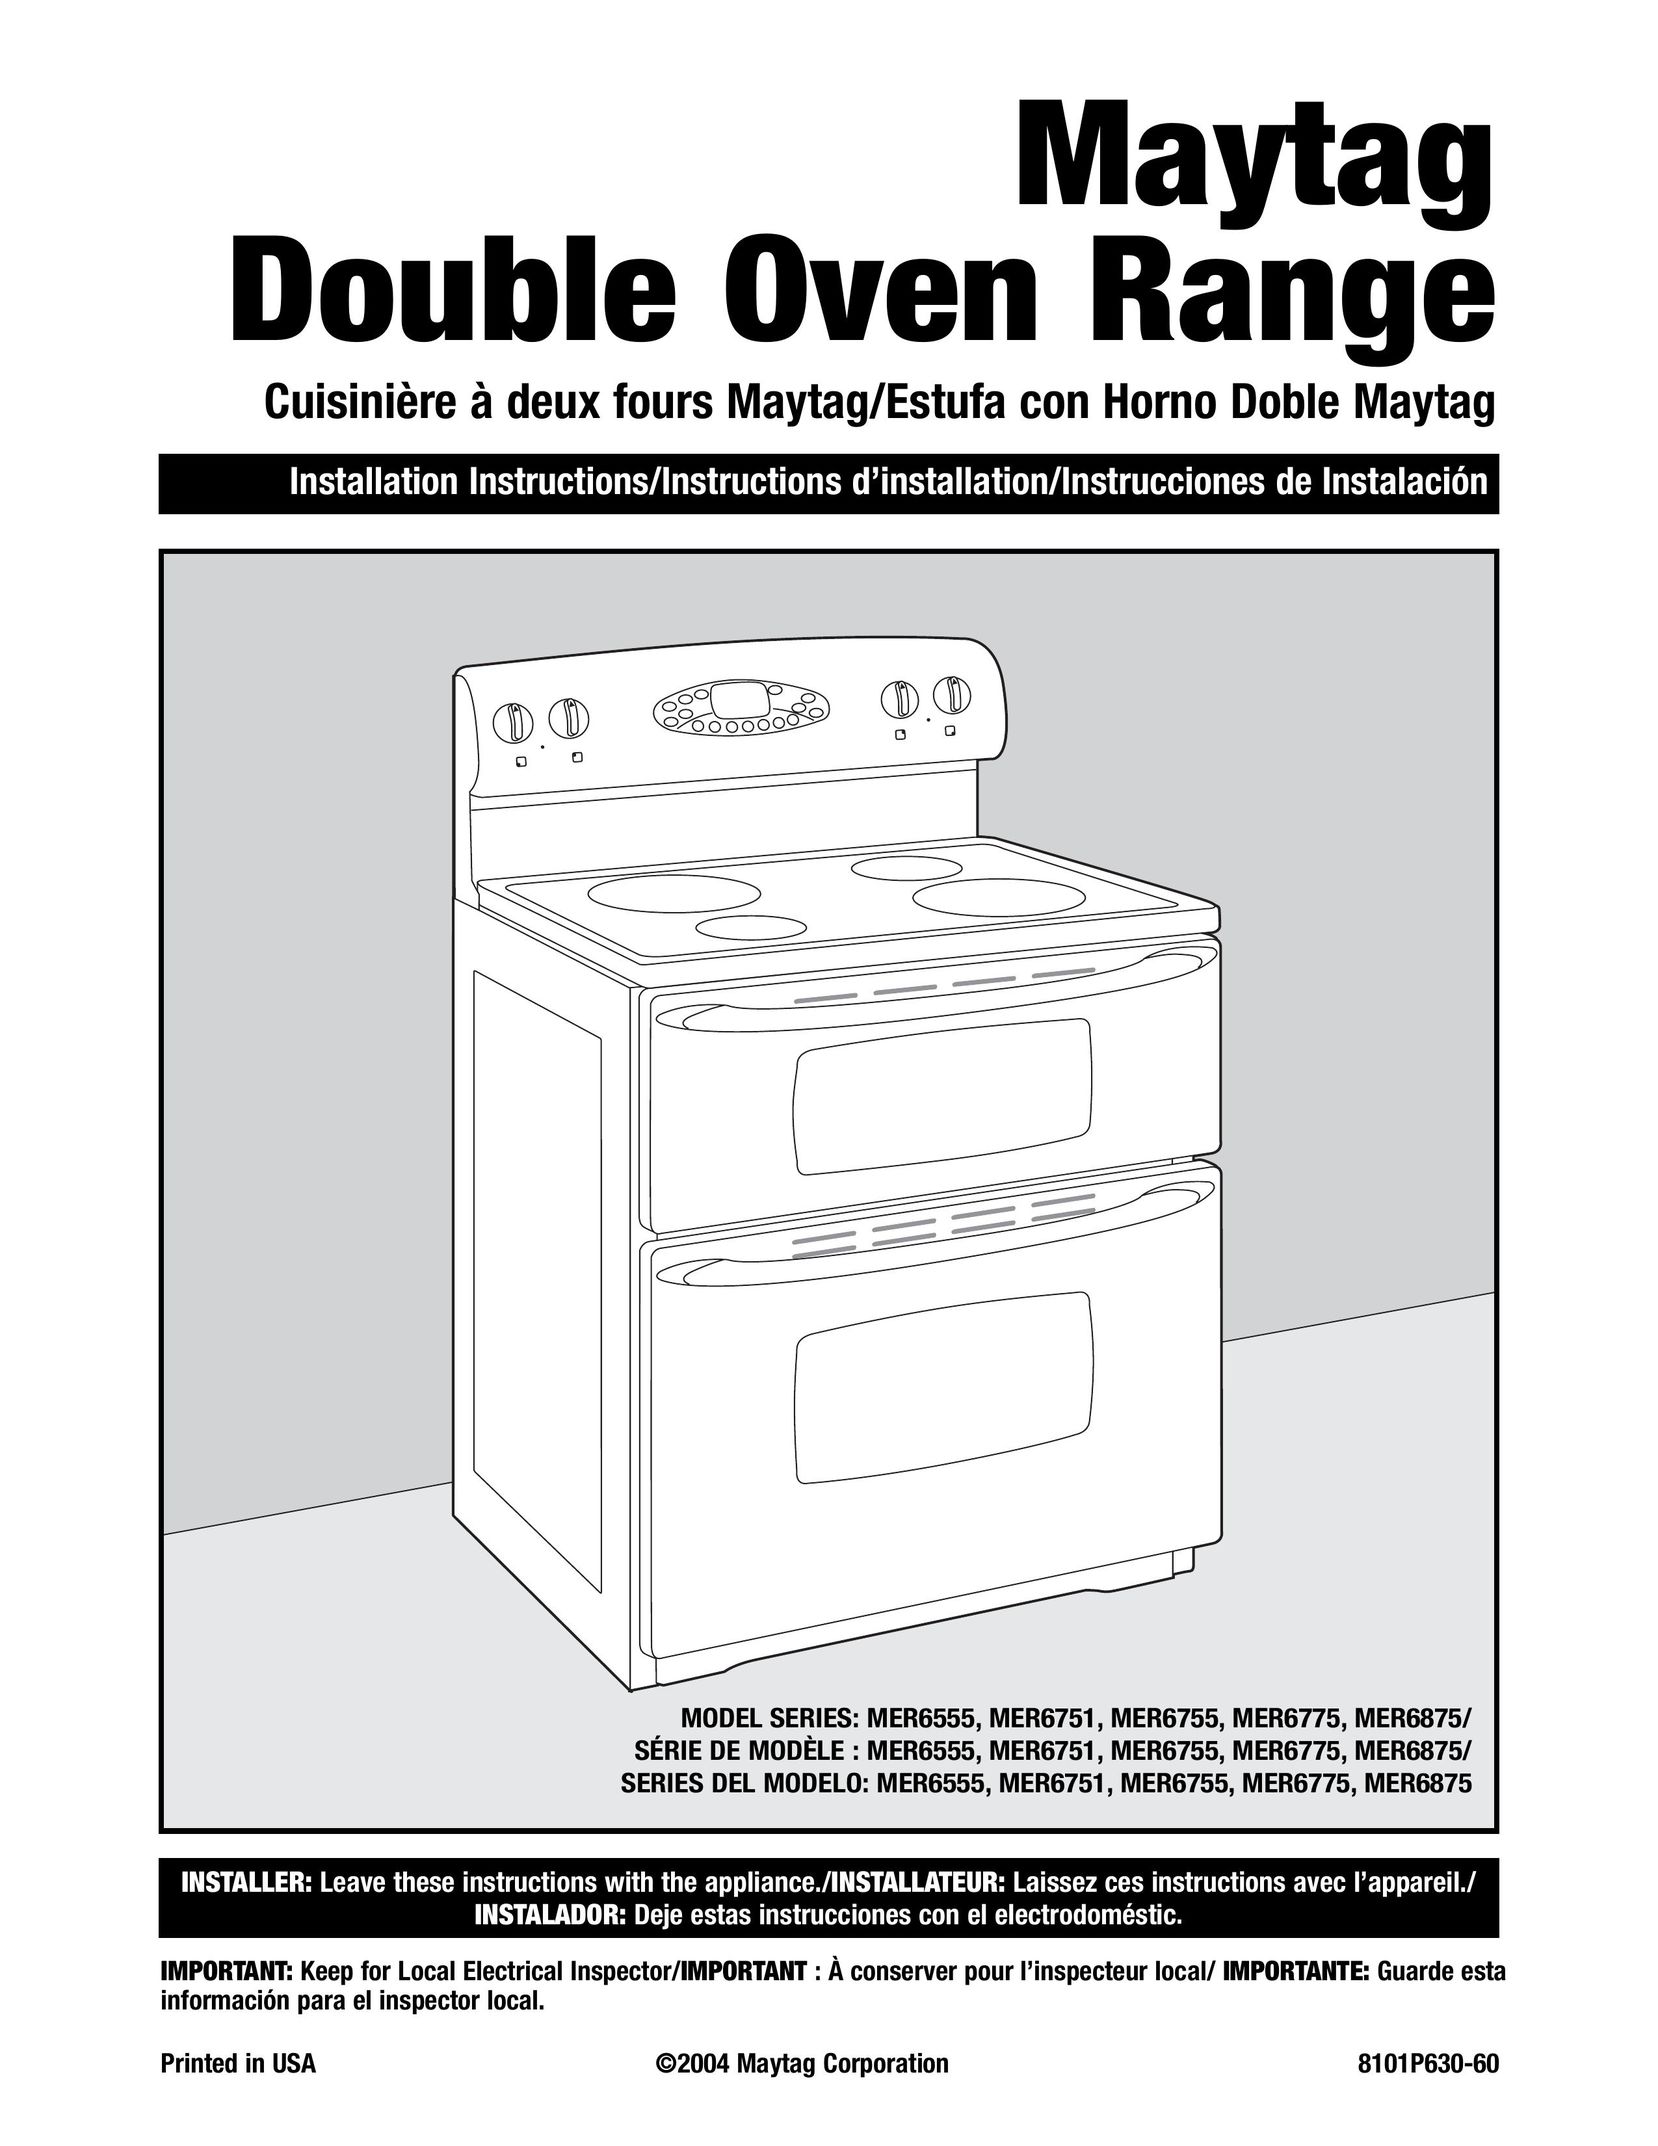 Maytag MER6755 Double Oven User Manual